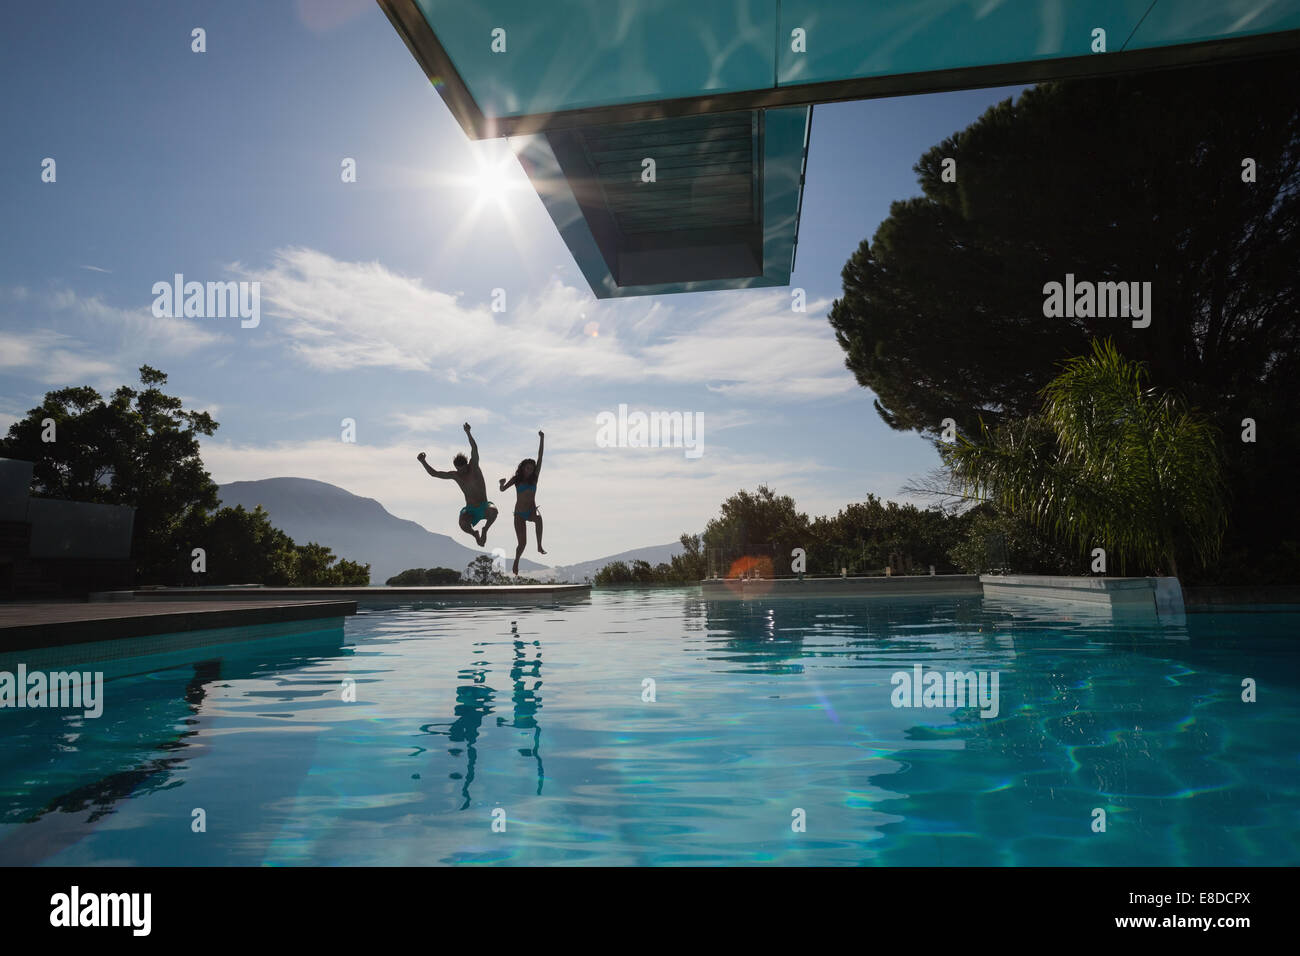 Cheerful young couple jumping into swimming pool Banque D'Images